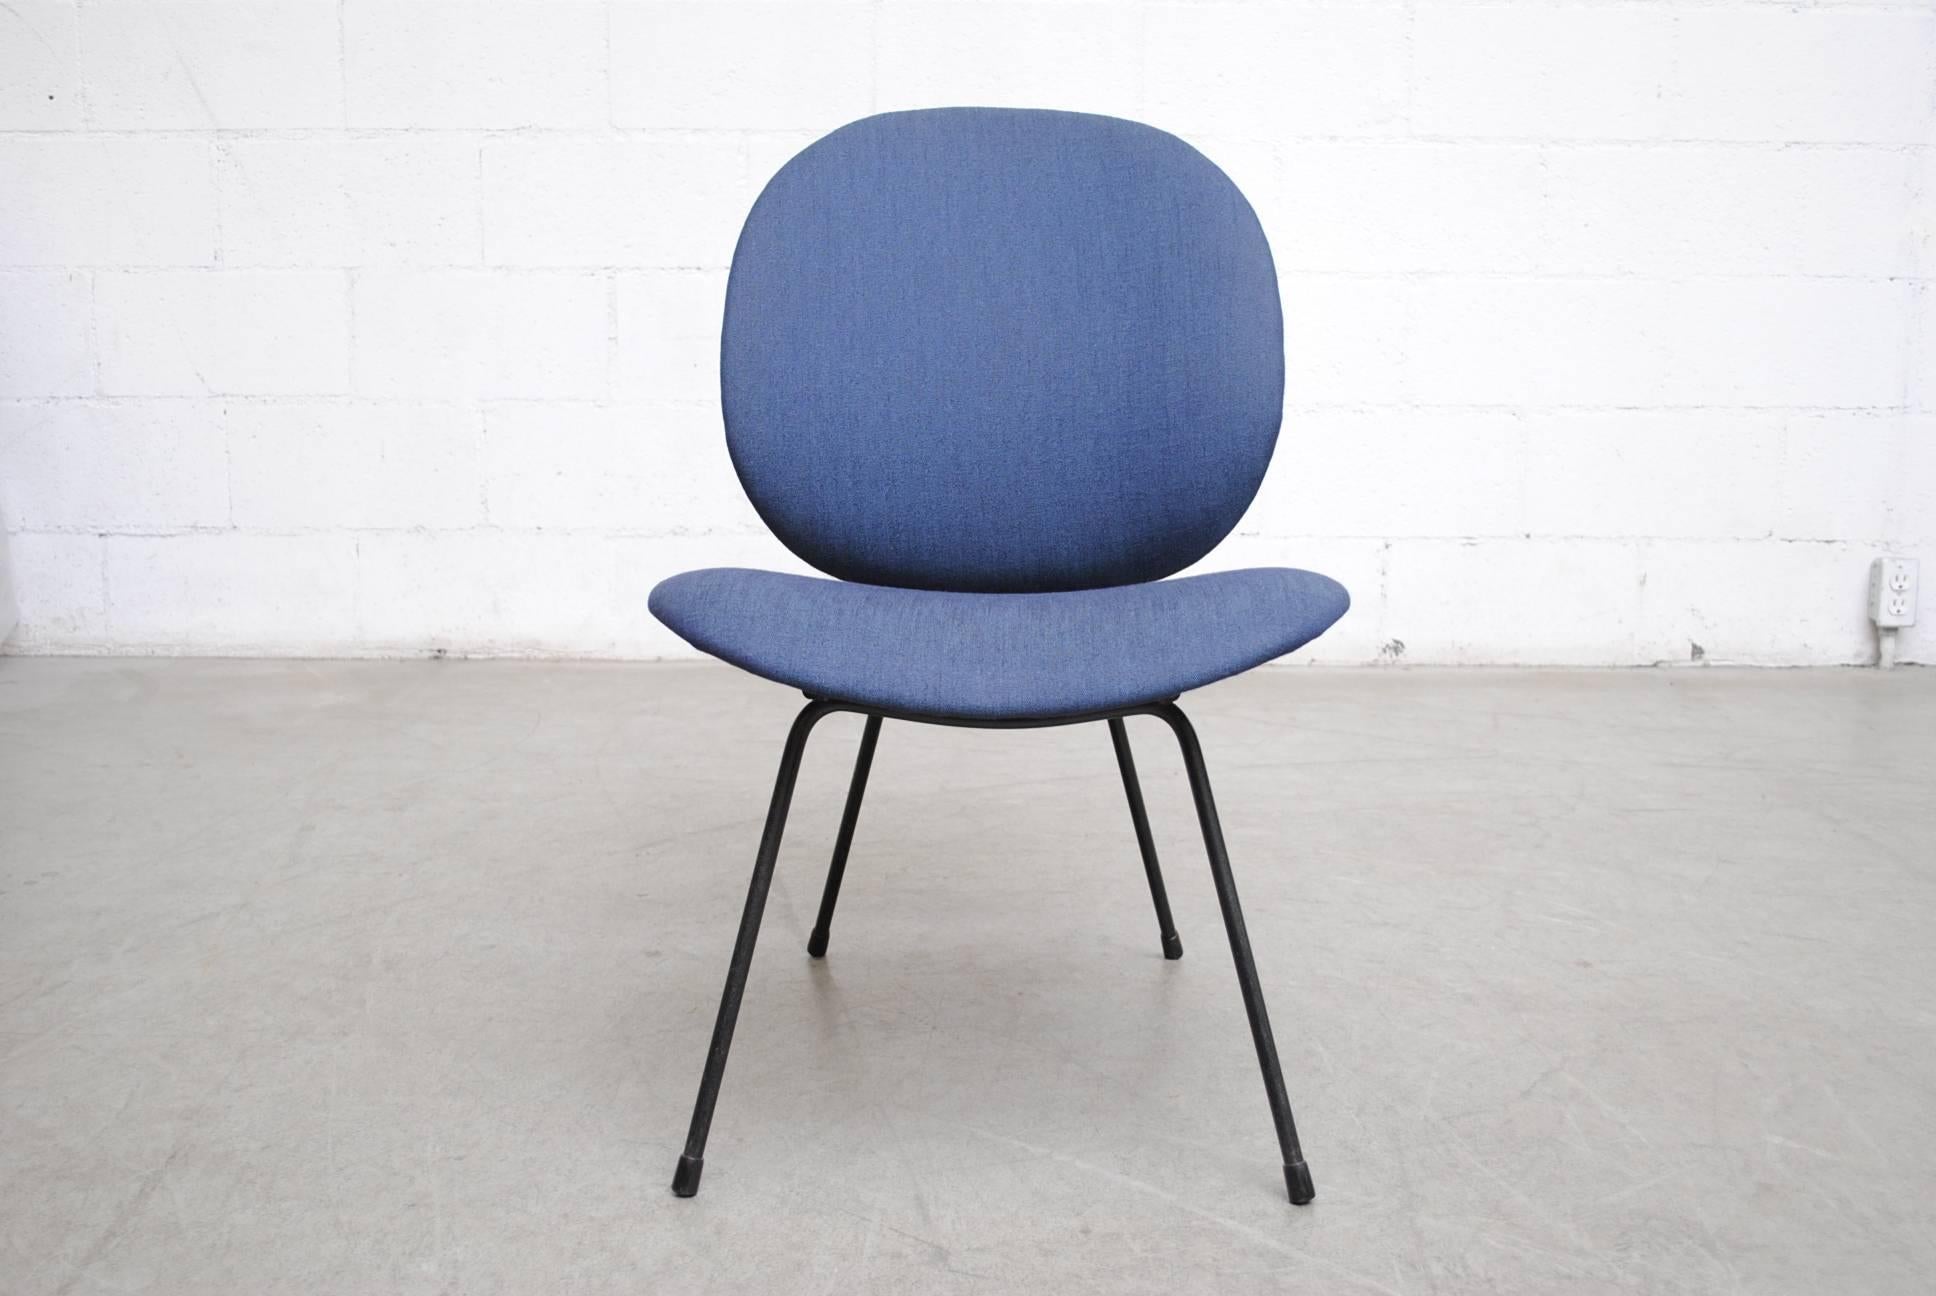 Armless version if this gorgeous simple Kembo lounge chair with black enameled metal wire frame and newly upholstered indigo blue fabric. Good original condition.